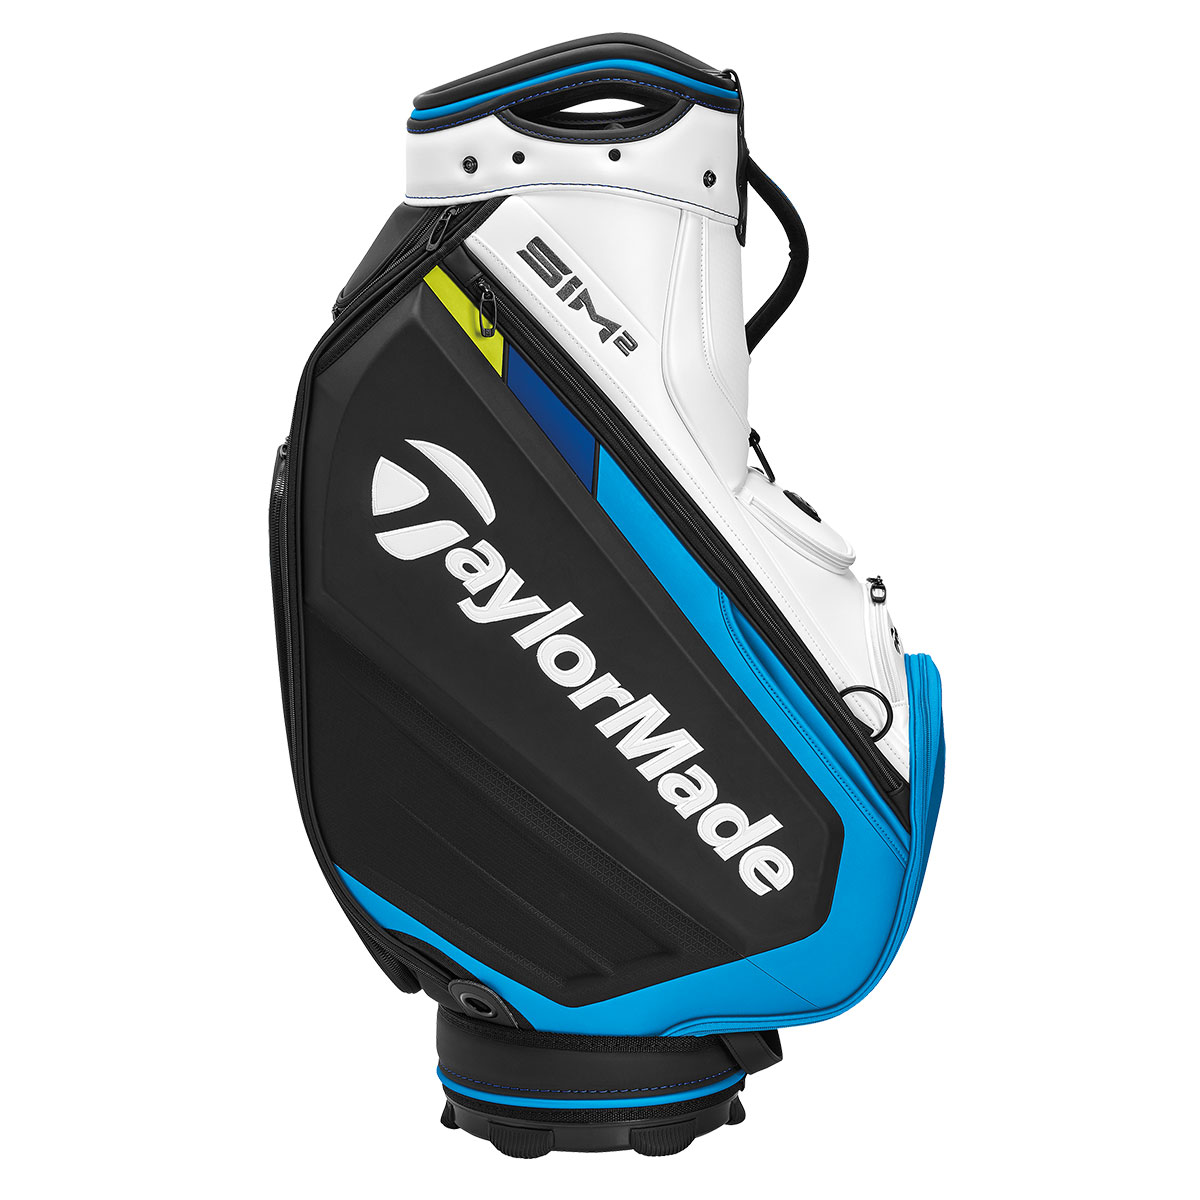 TaylorMade Tour Staff Bag from american golf